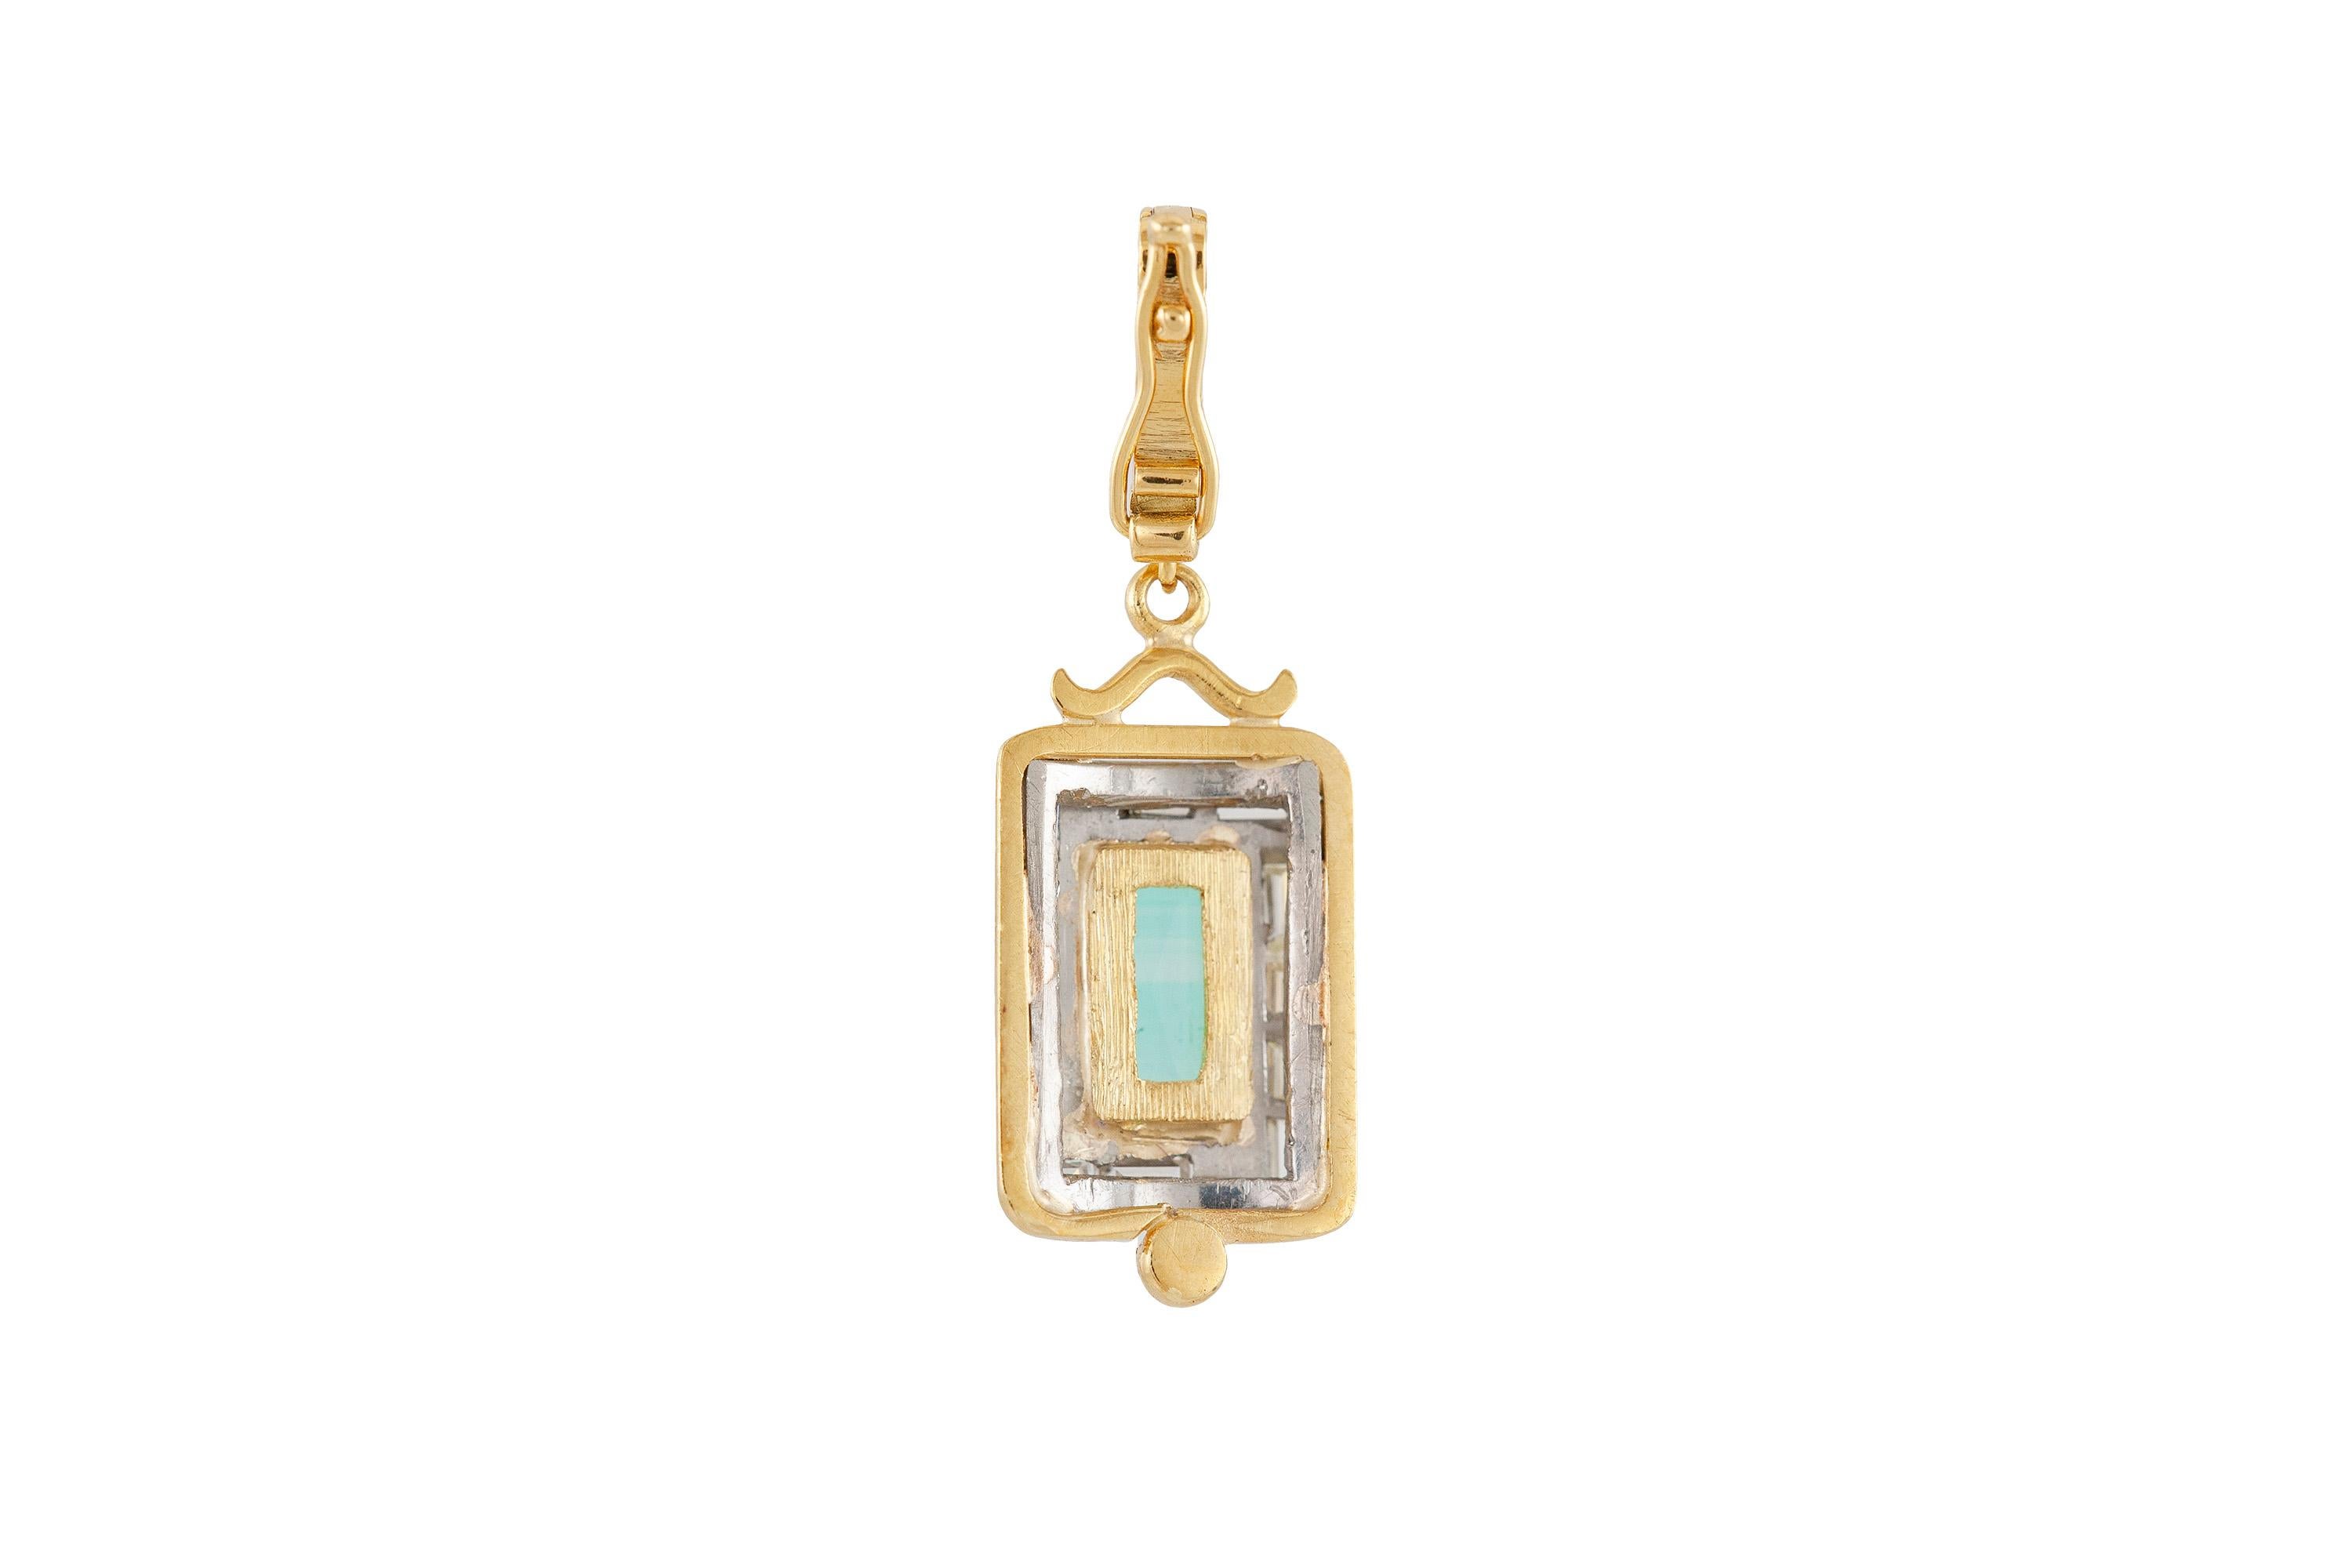 Rectangular pendant finely crafted in 18k yellow gold, with tourmaline and diamonds weighing a total of 1.50 dwt. Circa 1920.